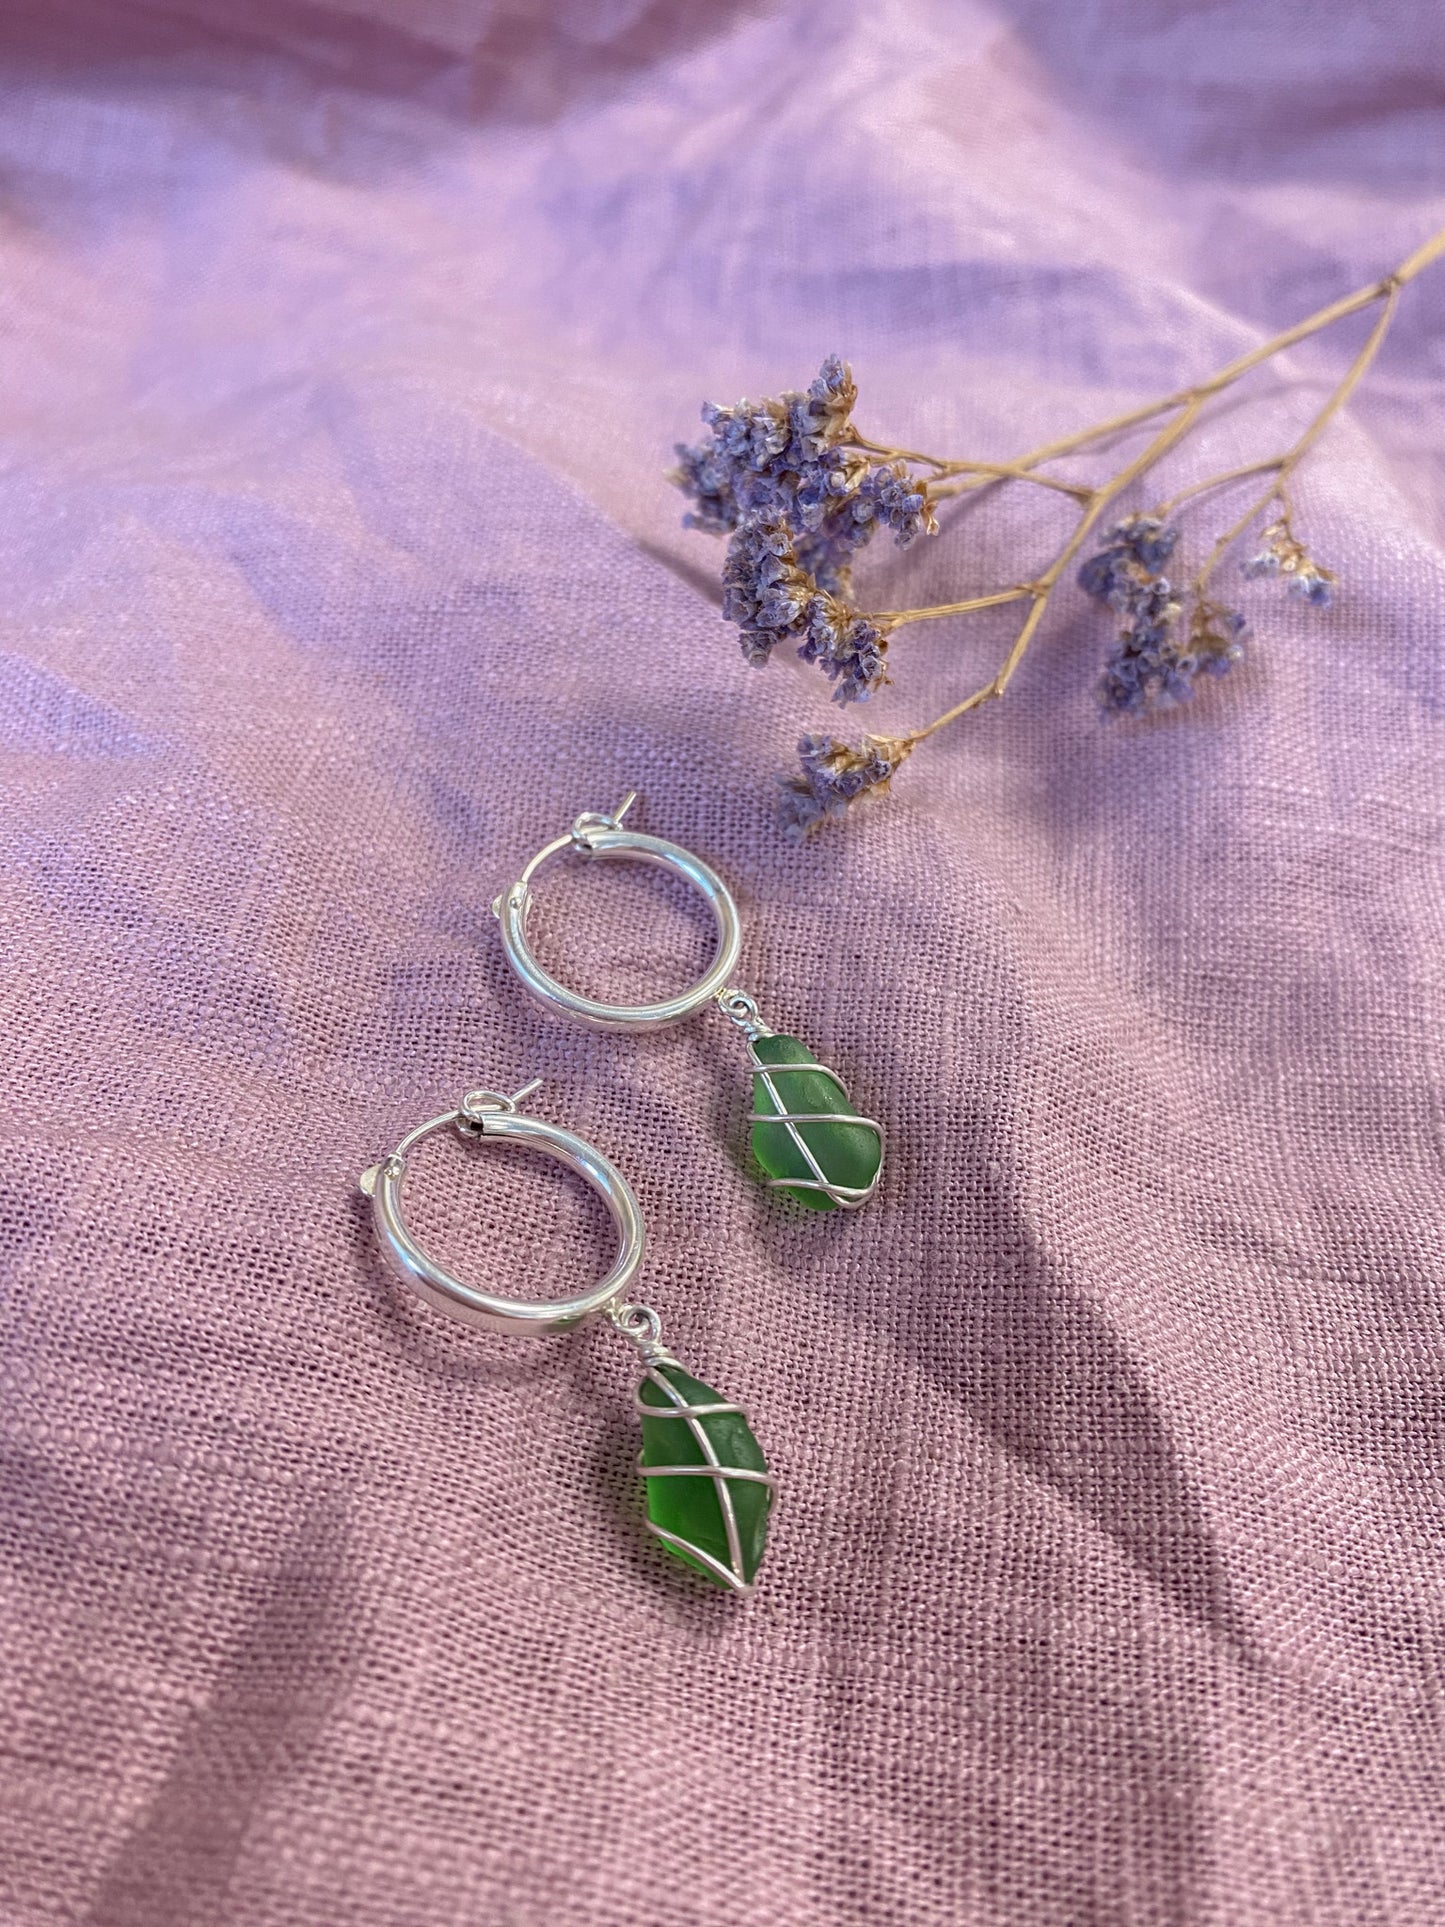 Leone Hoops in Sterling Silver & Bright Green